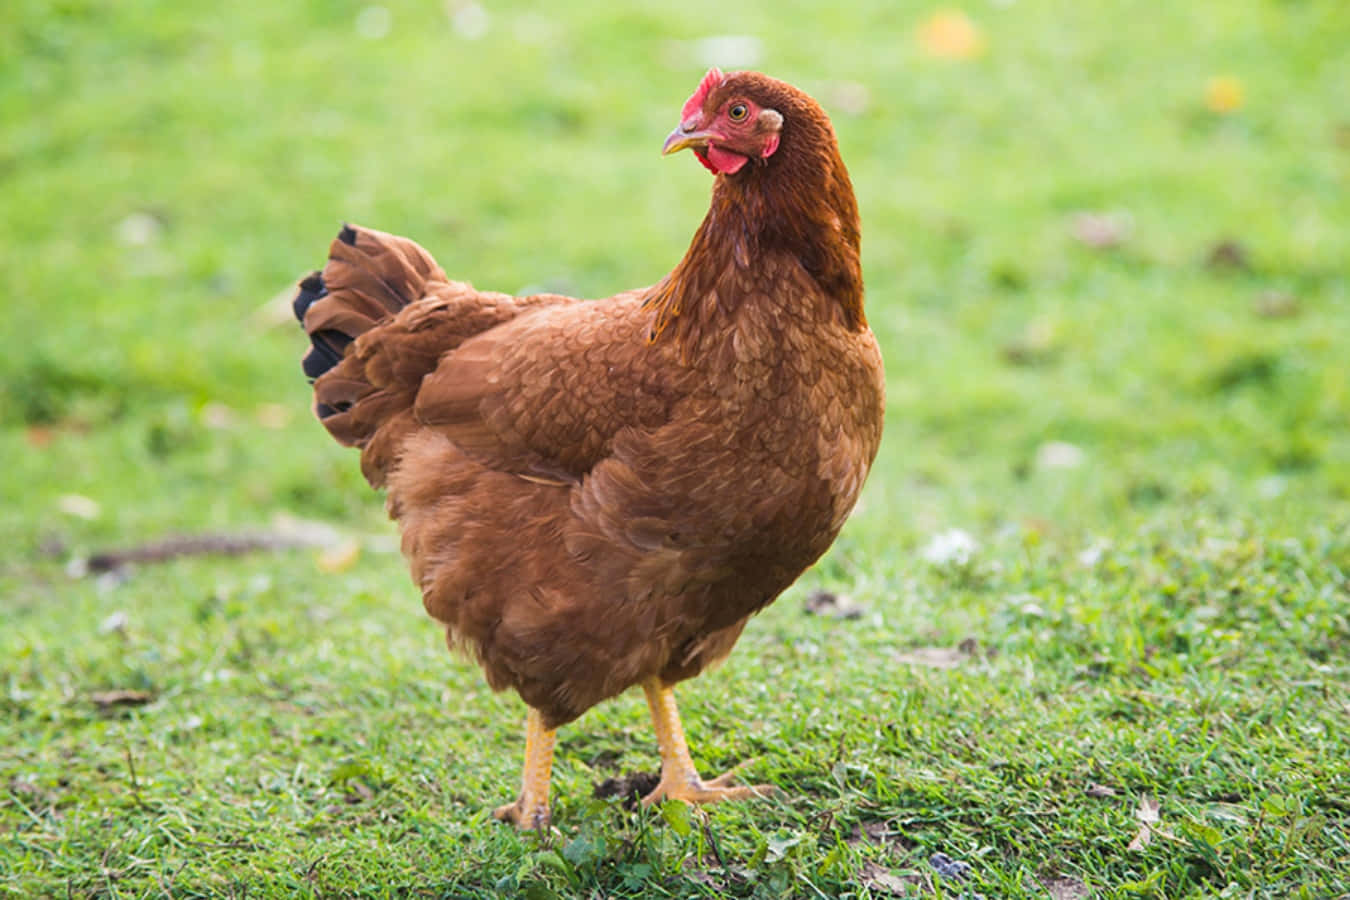 A Brown Chicken Standing On The Grass